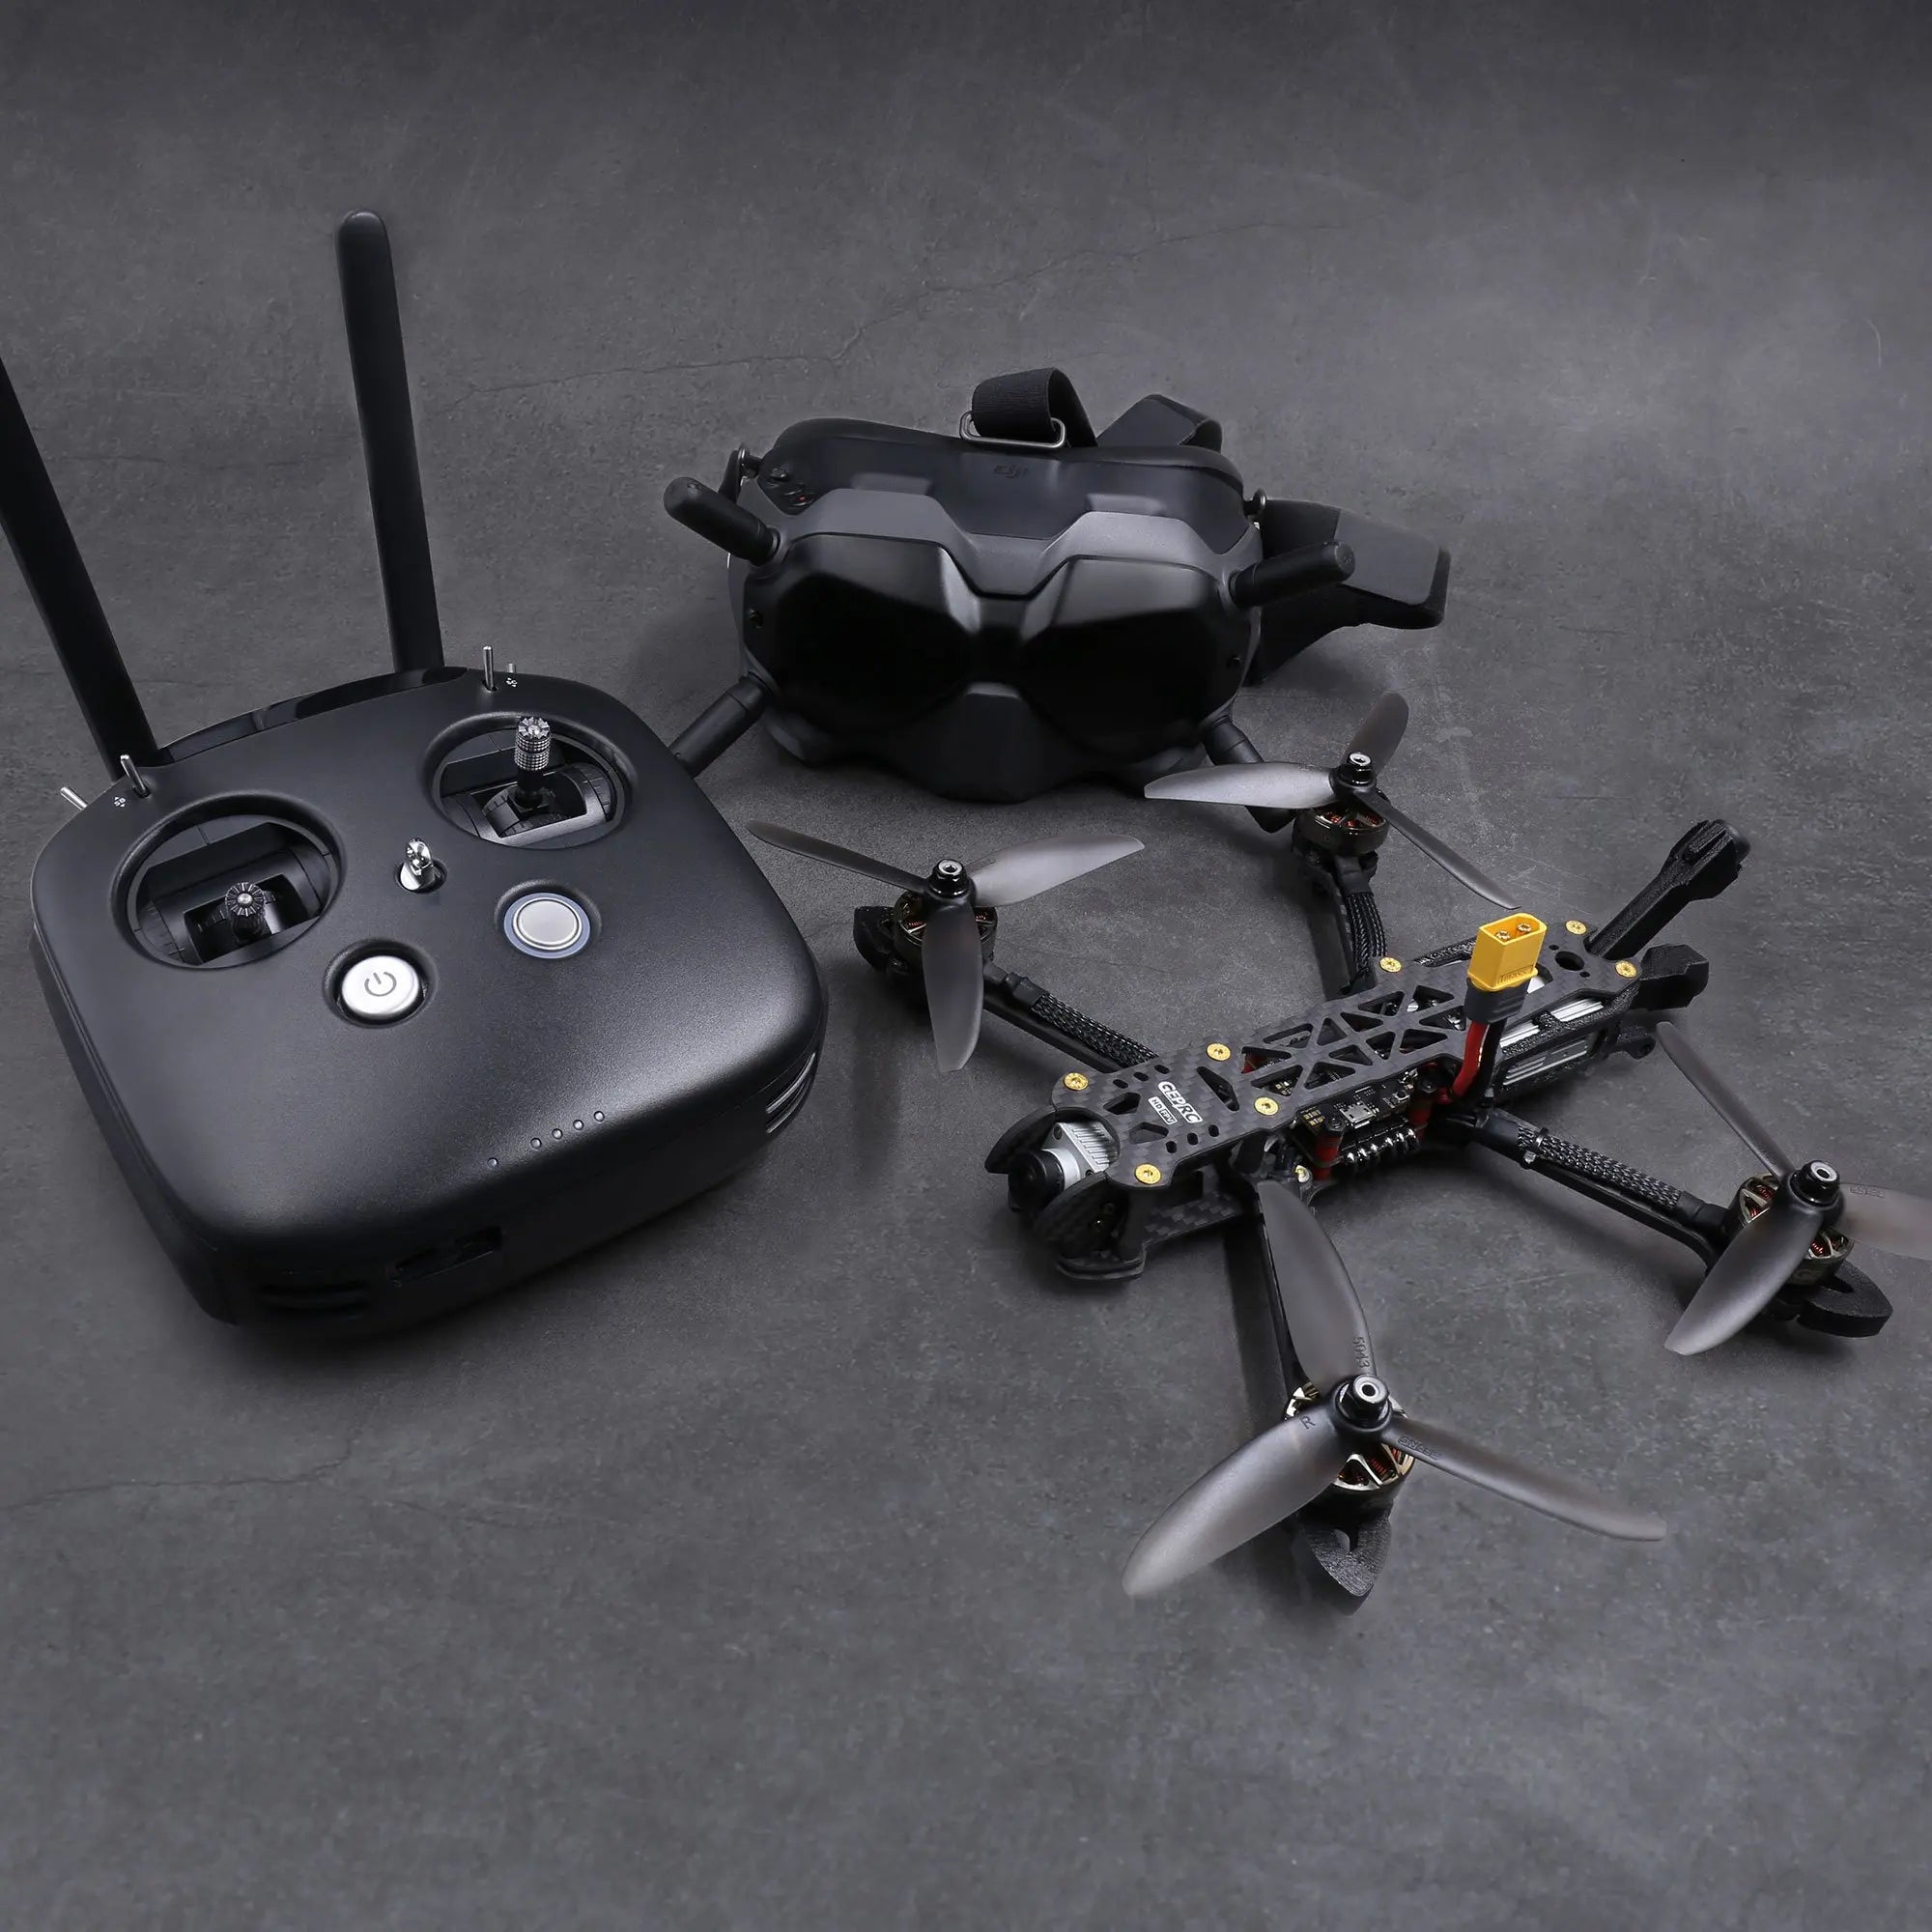 GEPRC MARK4 FPV Drone, DJI has redefined the drone racing industry with the new Digital FPV System .